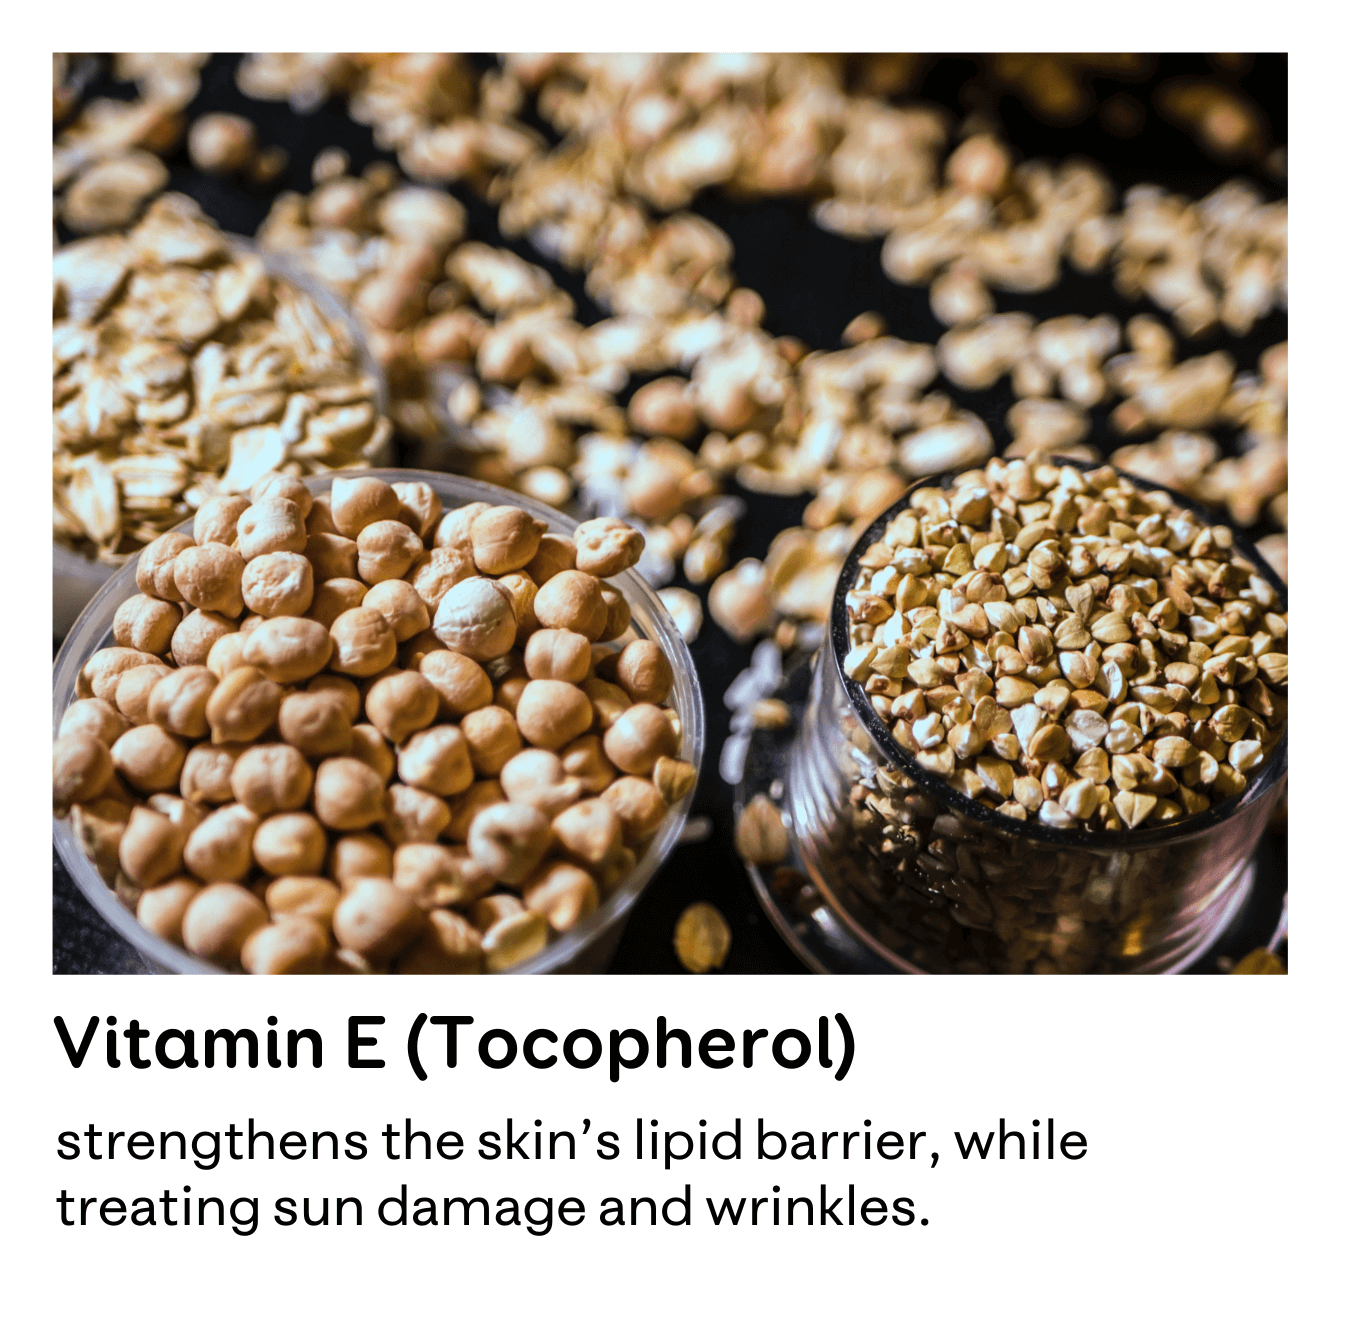 An image of Vitamin E with information about the benefits it has for skincare purposes.